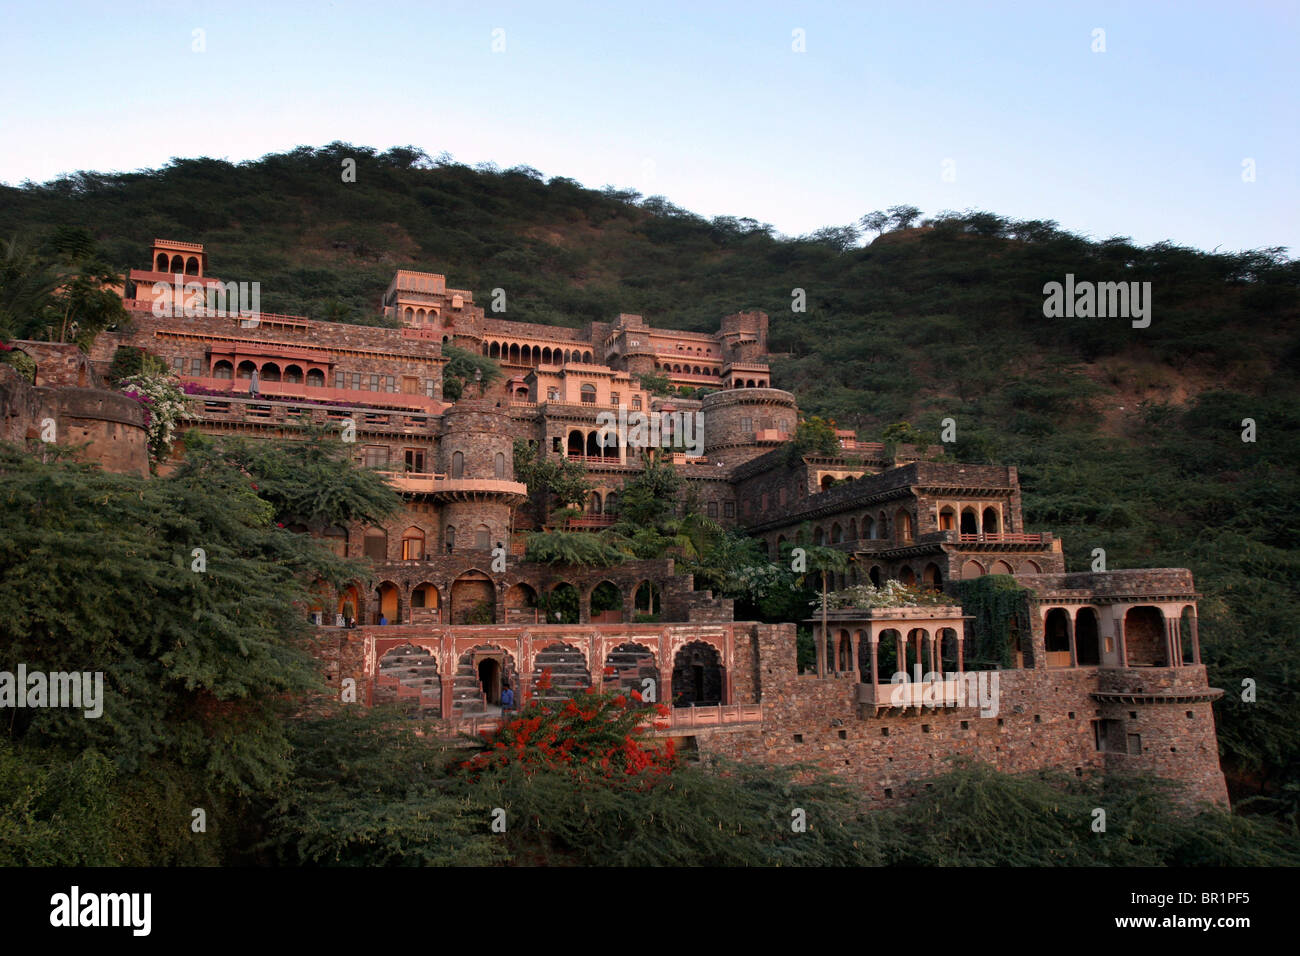 The Neemrana Fort Caste Hotel in Rajasthan. An old 14th century fort which has been converted into a heritage hotel. Stock Photo